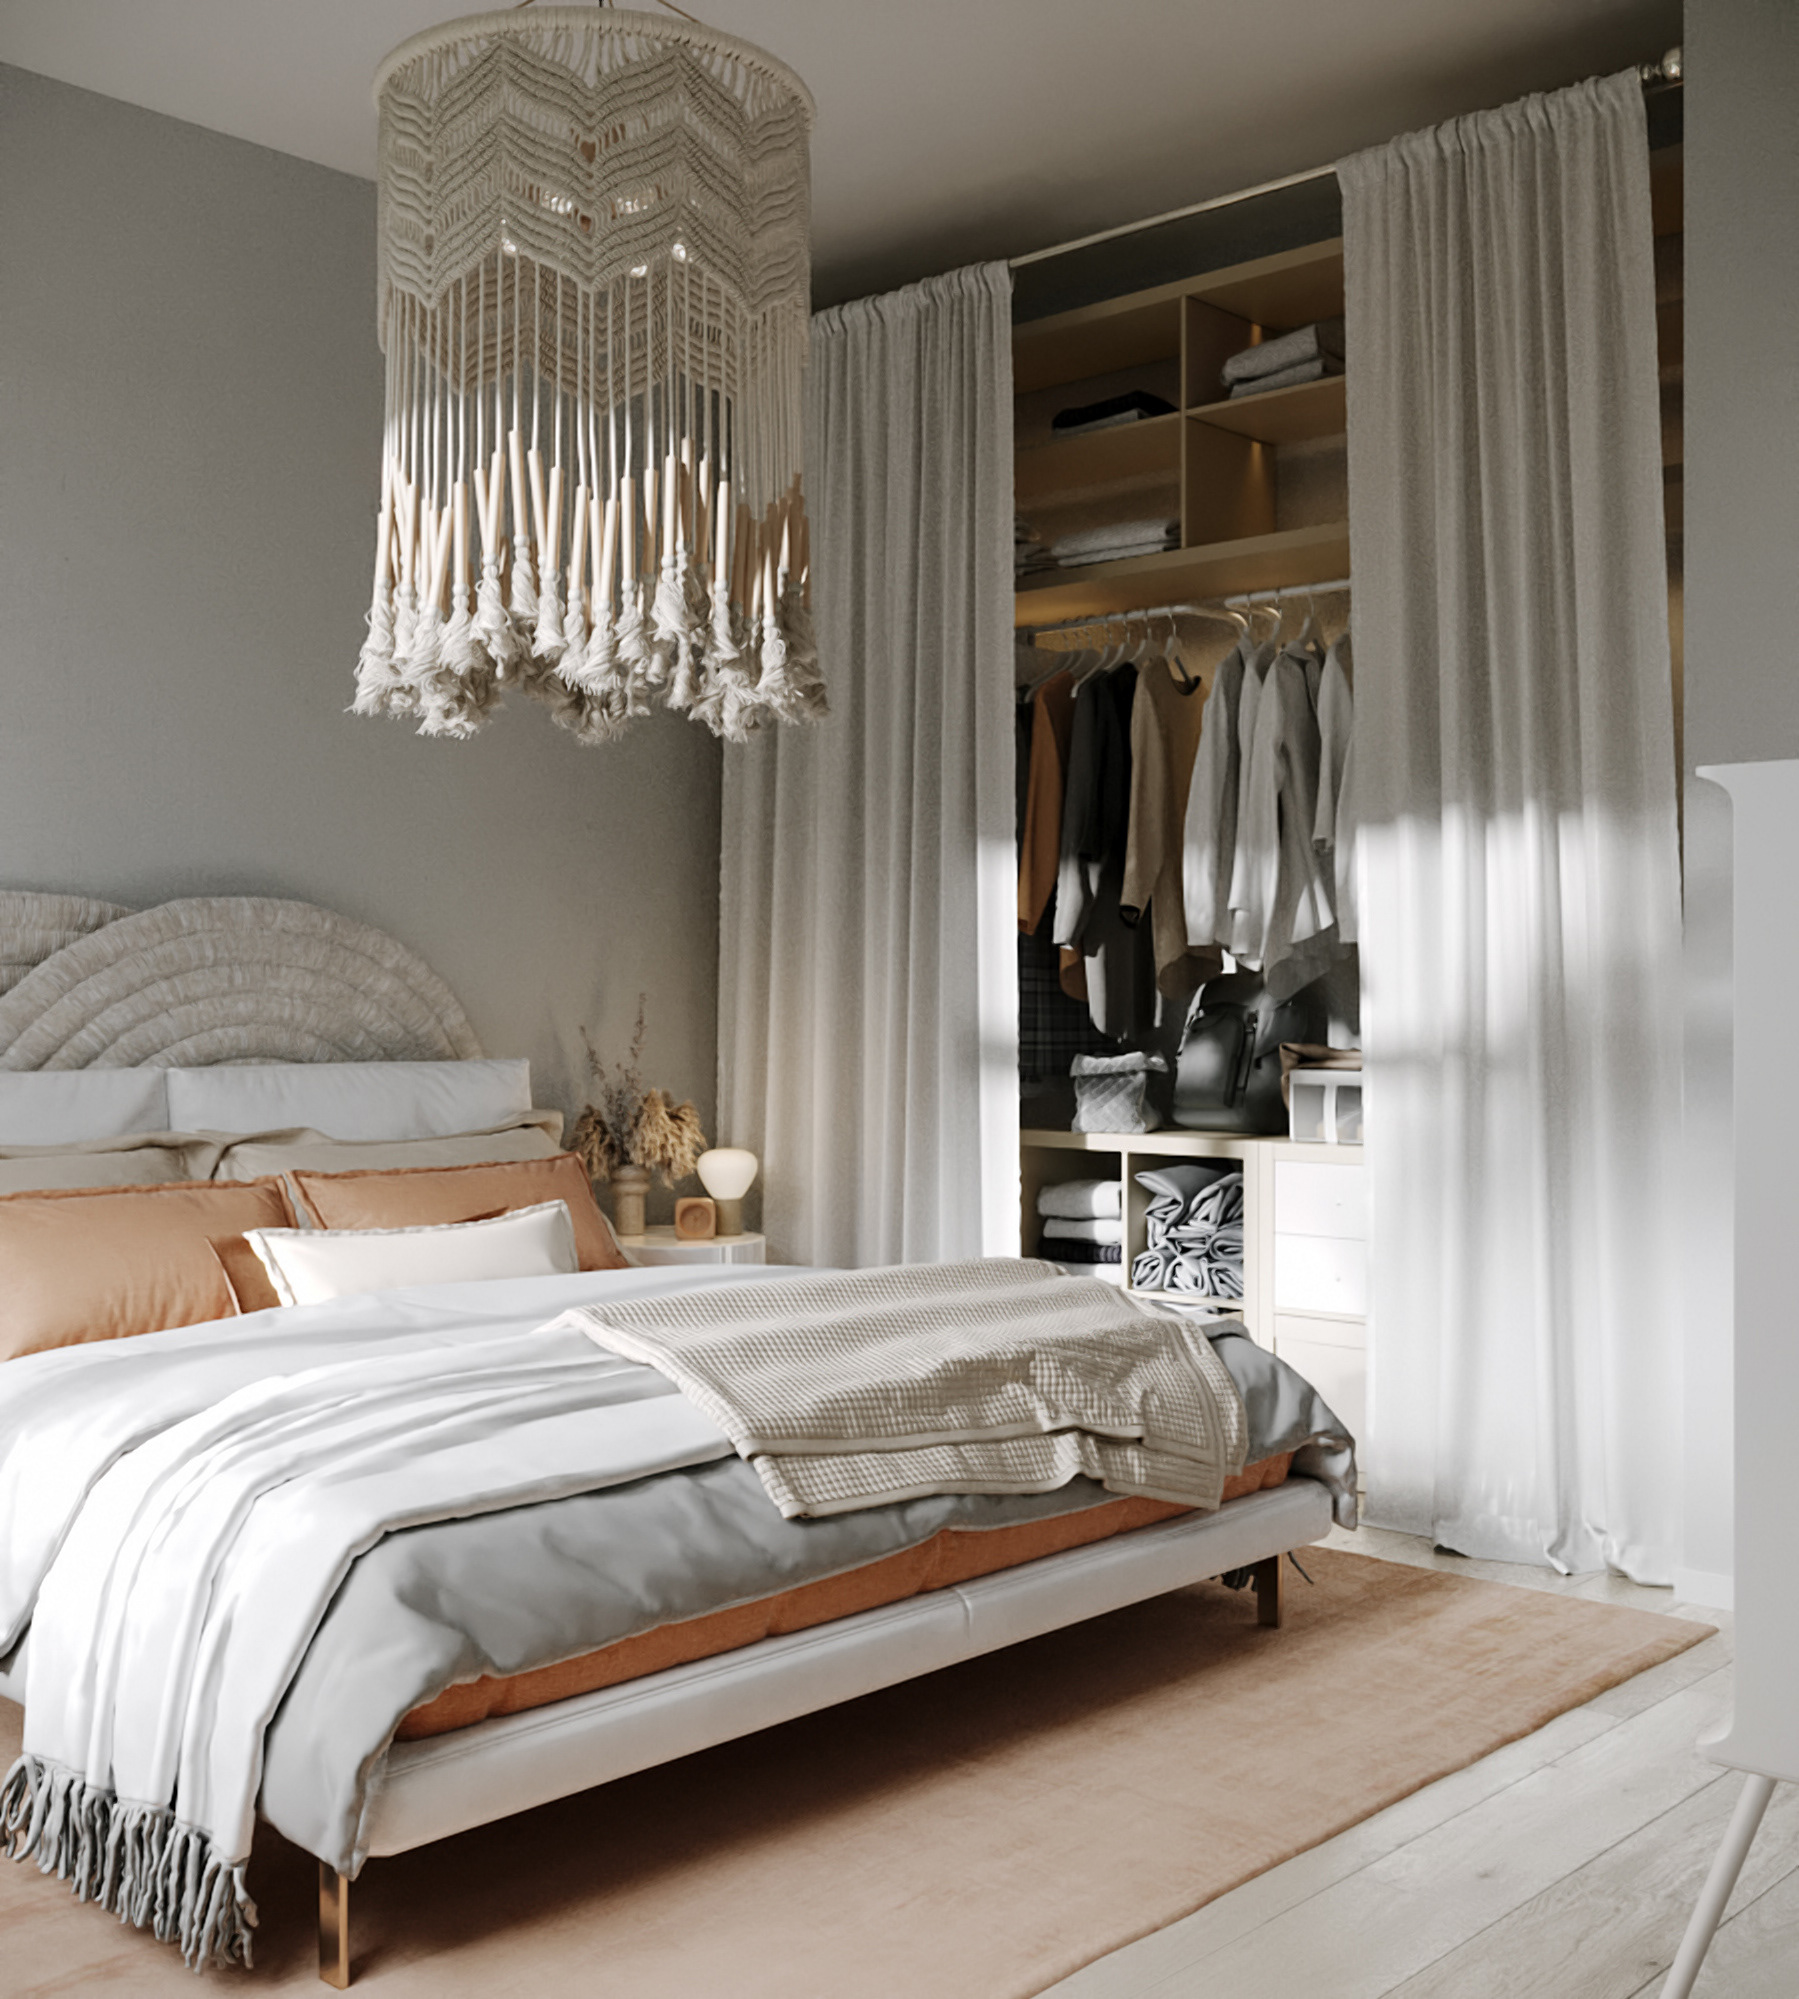 Furniture arrangement makes it easier for the owner to move around. In addition, the bed is positioned parallel to cabinets, which are tidy and clean. Instead of wooden doors, white curtains are used to hide the wardrobe which is also a good way to increase the illumination for the bedroom.